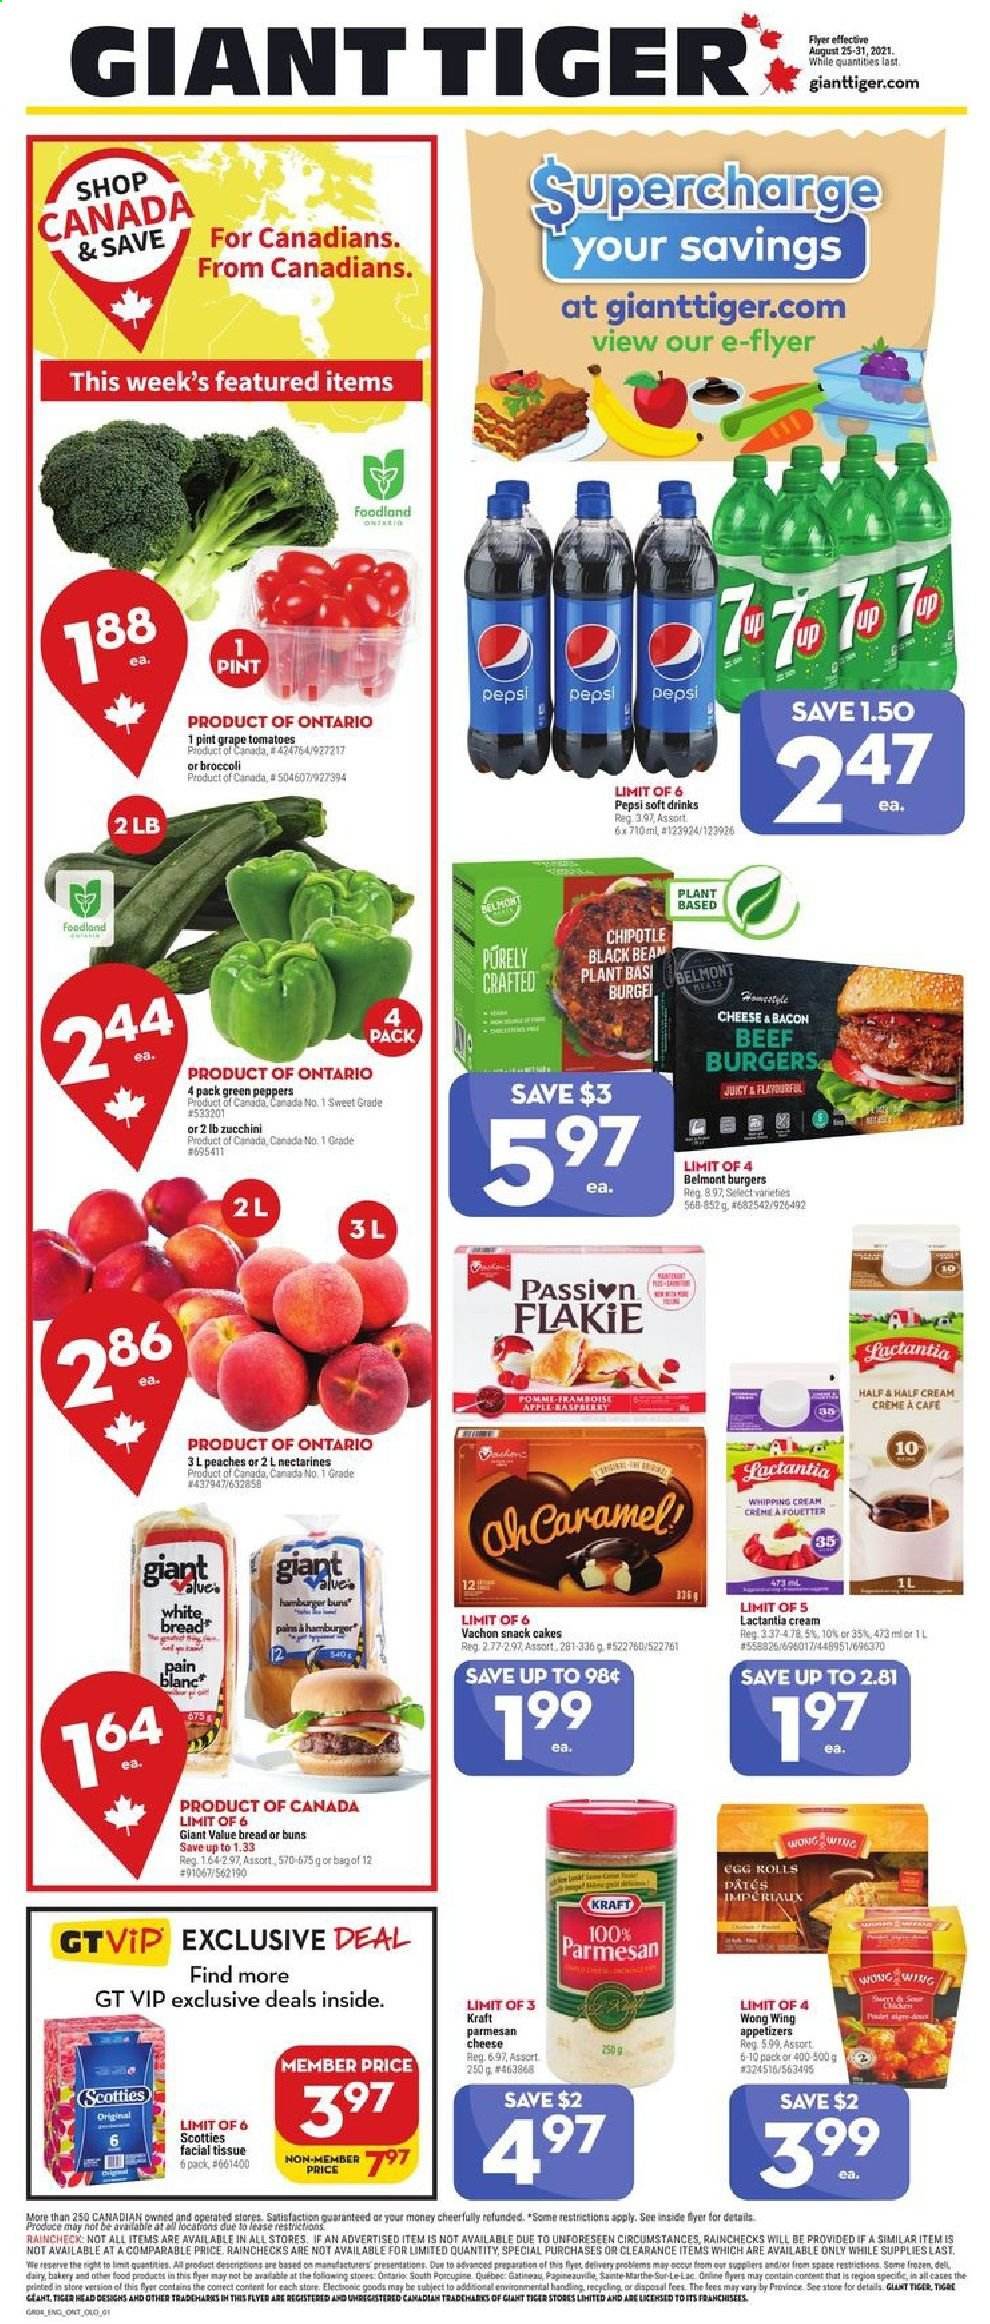 thumbnail - Giant Tiger Flyer - August 25, 2021 - August 31, 2021 - Sales products - bread, white bread, cake, buns, broccoli, zucchini, peppers, peaches, hamburger, egg rolls, beef burger, Kraft®, bacon, parmesan, snack, Pepsi, soft drink, L'Or, tissues. Page 1.